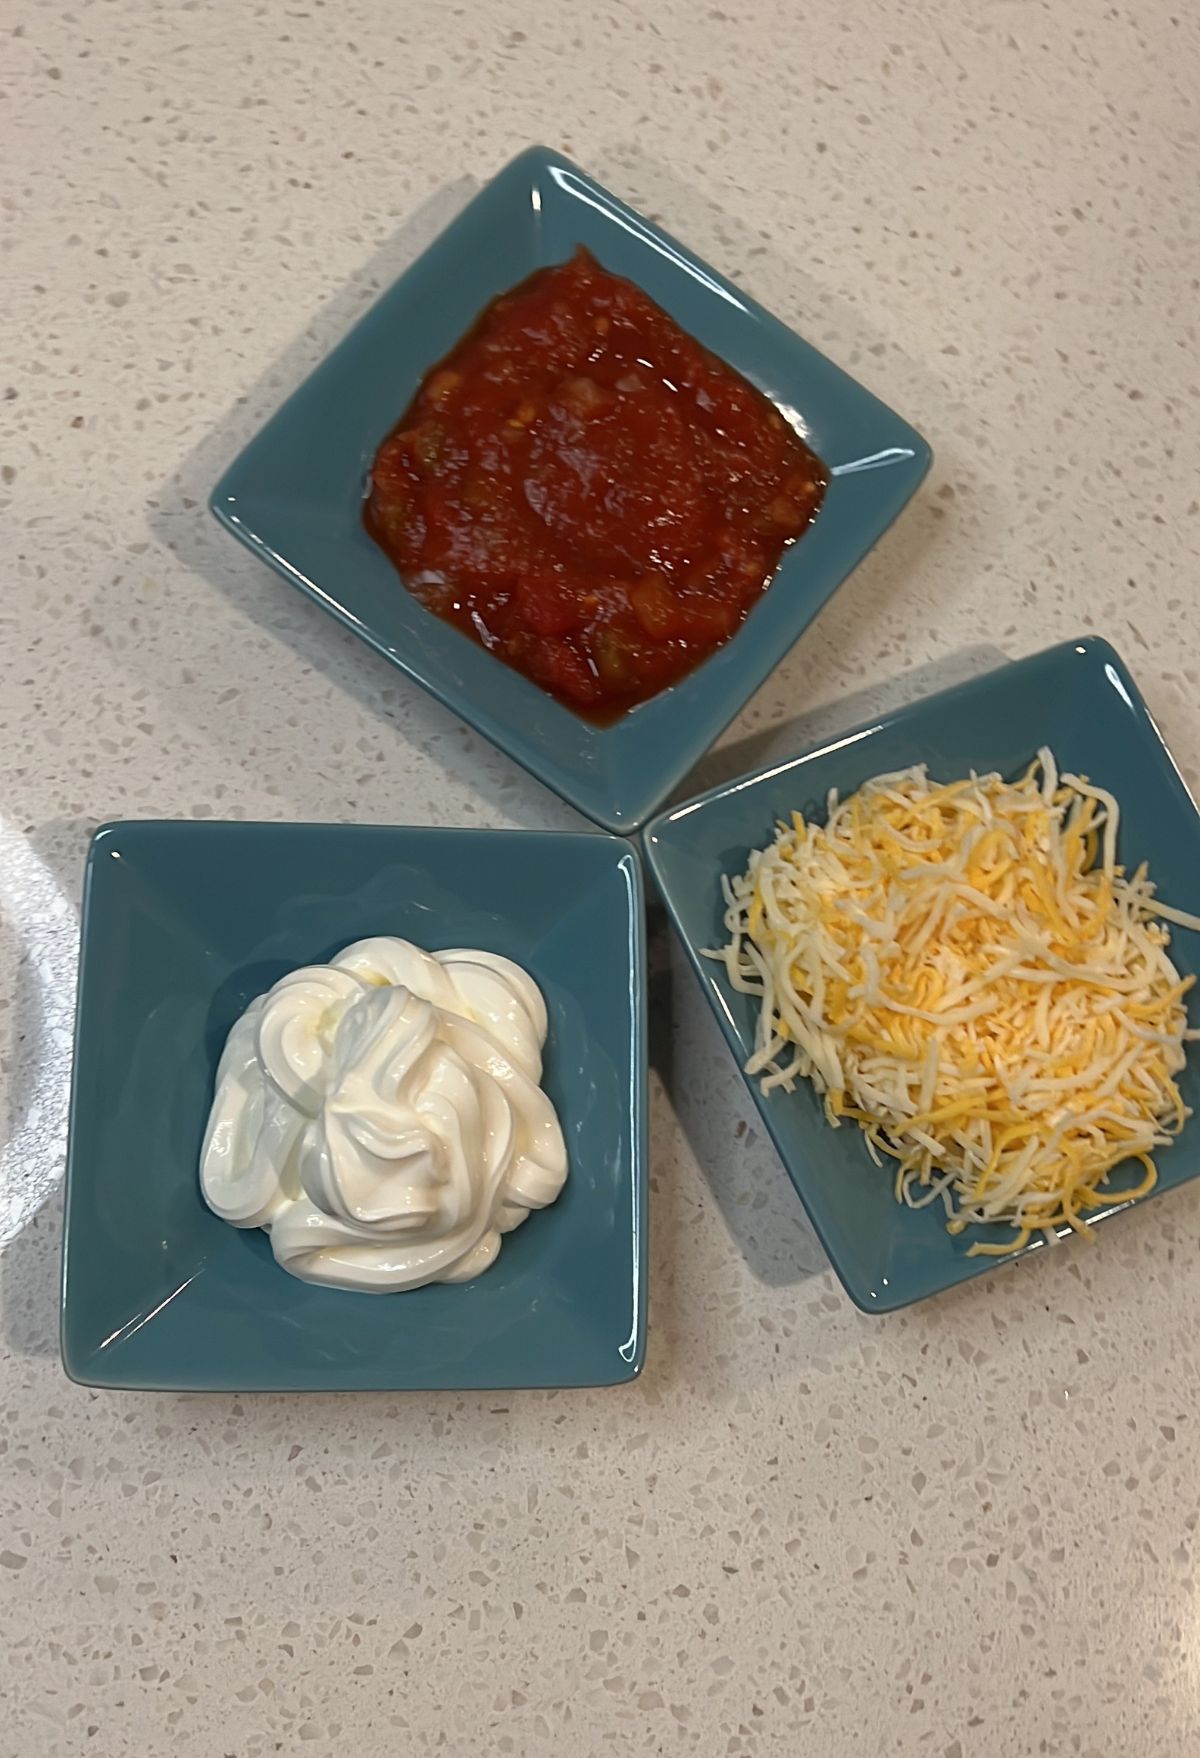 Three square bowls on a countertop containing salsa, sour cream, and shredded cheese respectively.